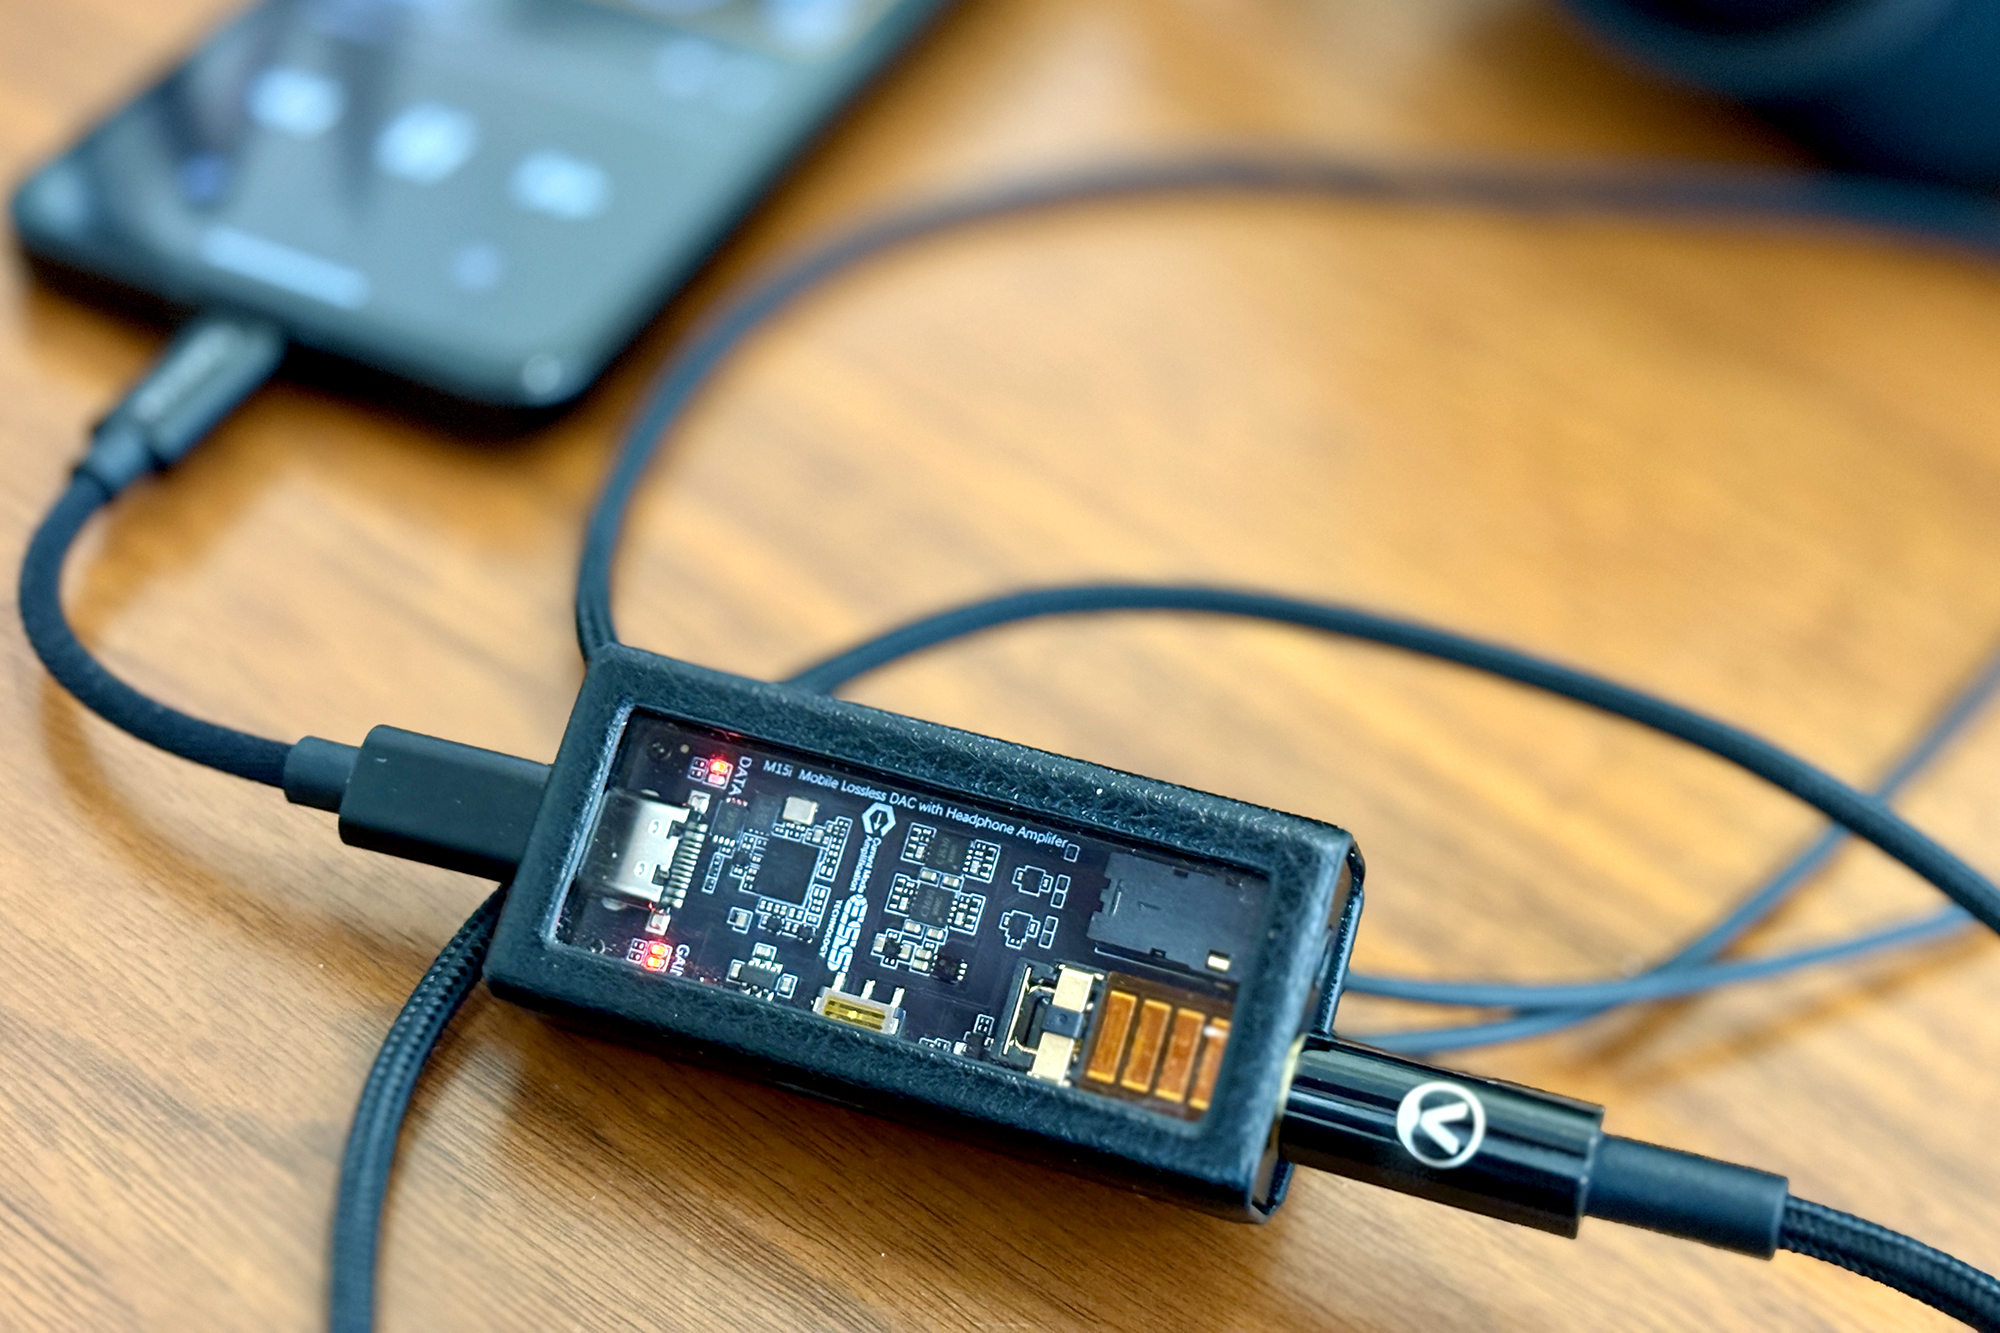 Rectangular Questyle M15i USB DAC dongle in a black leather slipcase on a wood table.